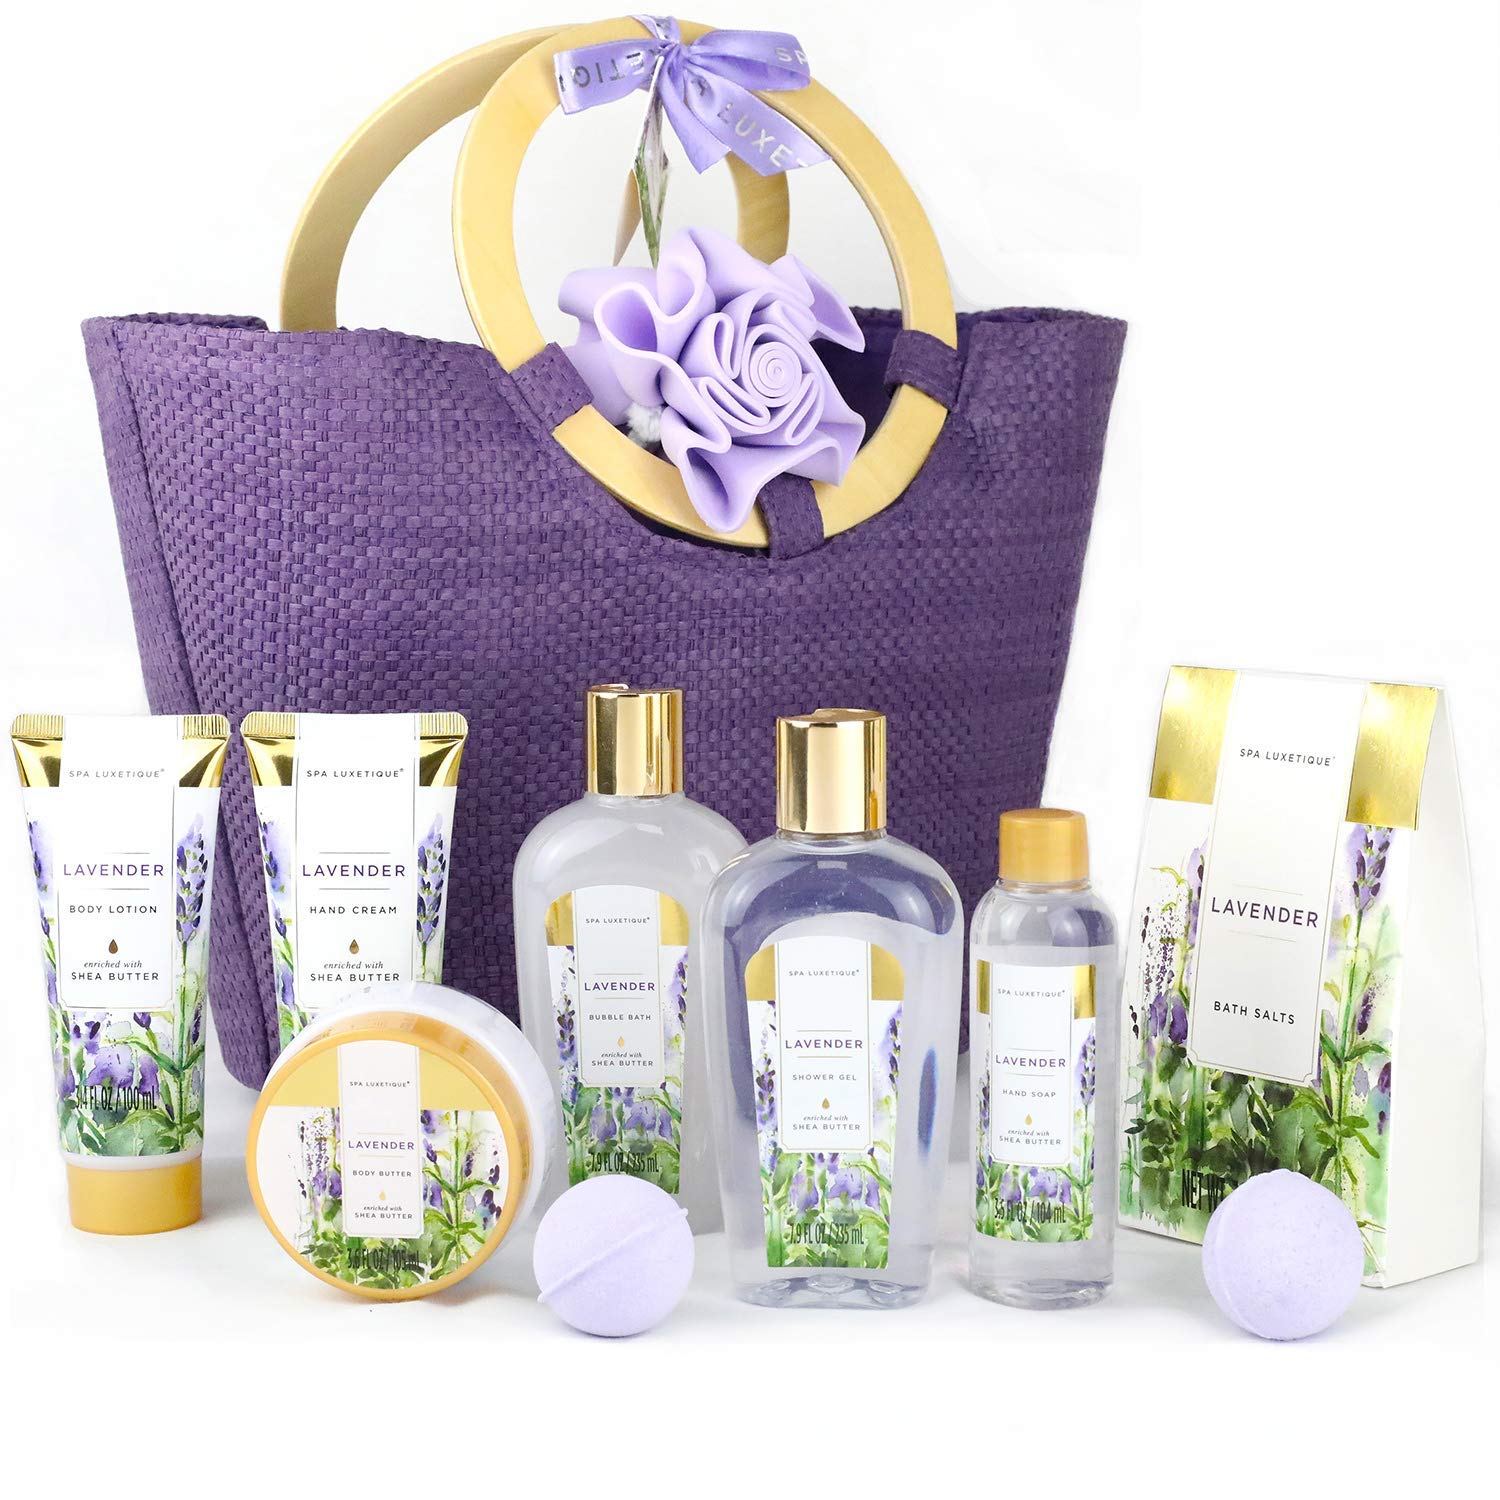 Spa Luxetique Lavender Relaxing Bath & Spa Gift Set, 10-Piece